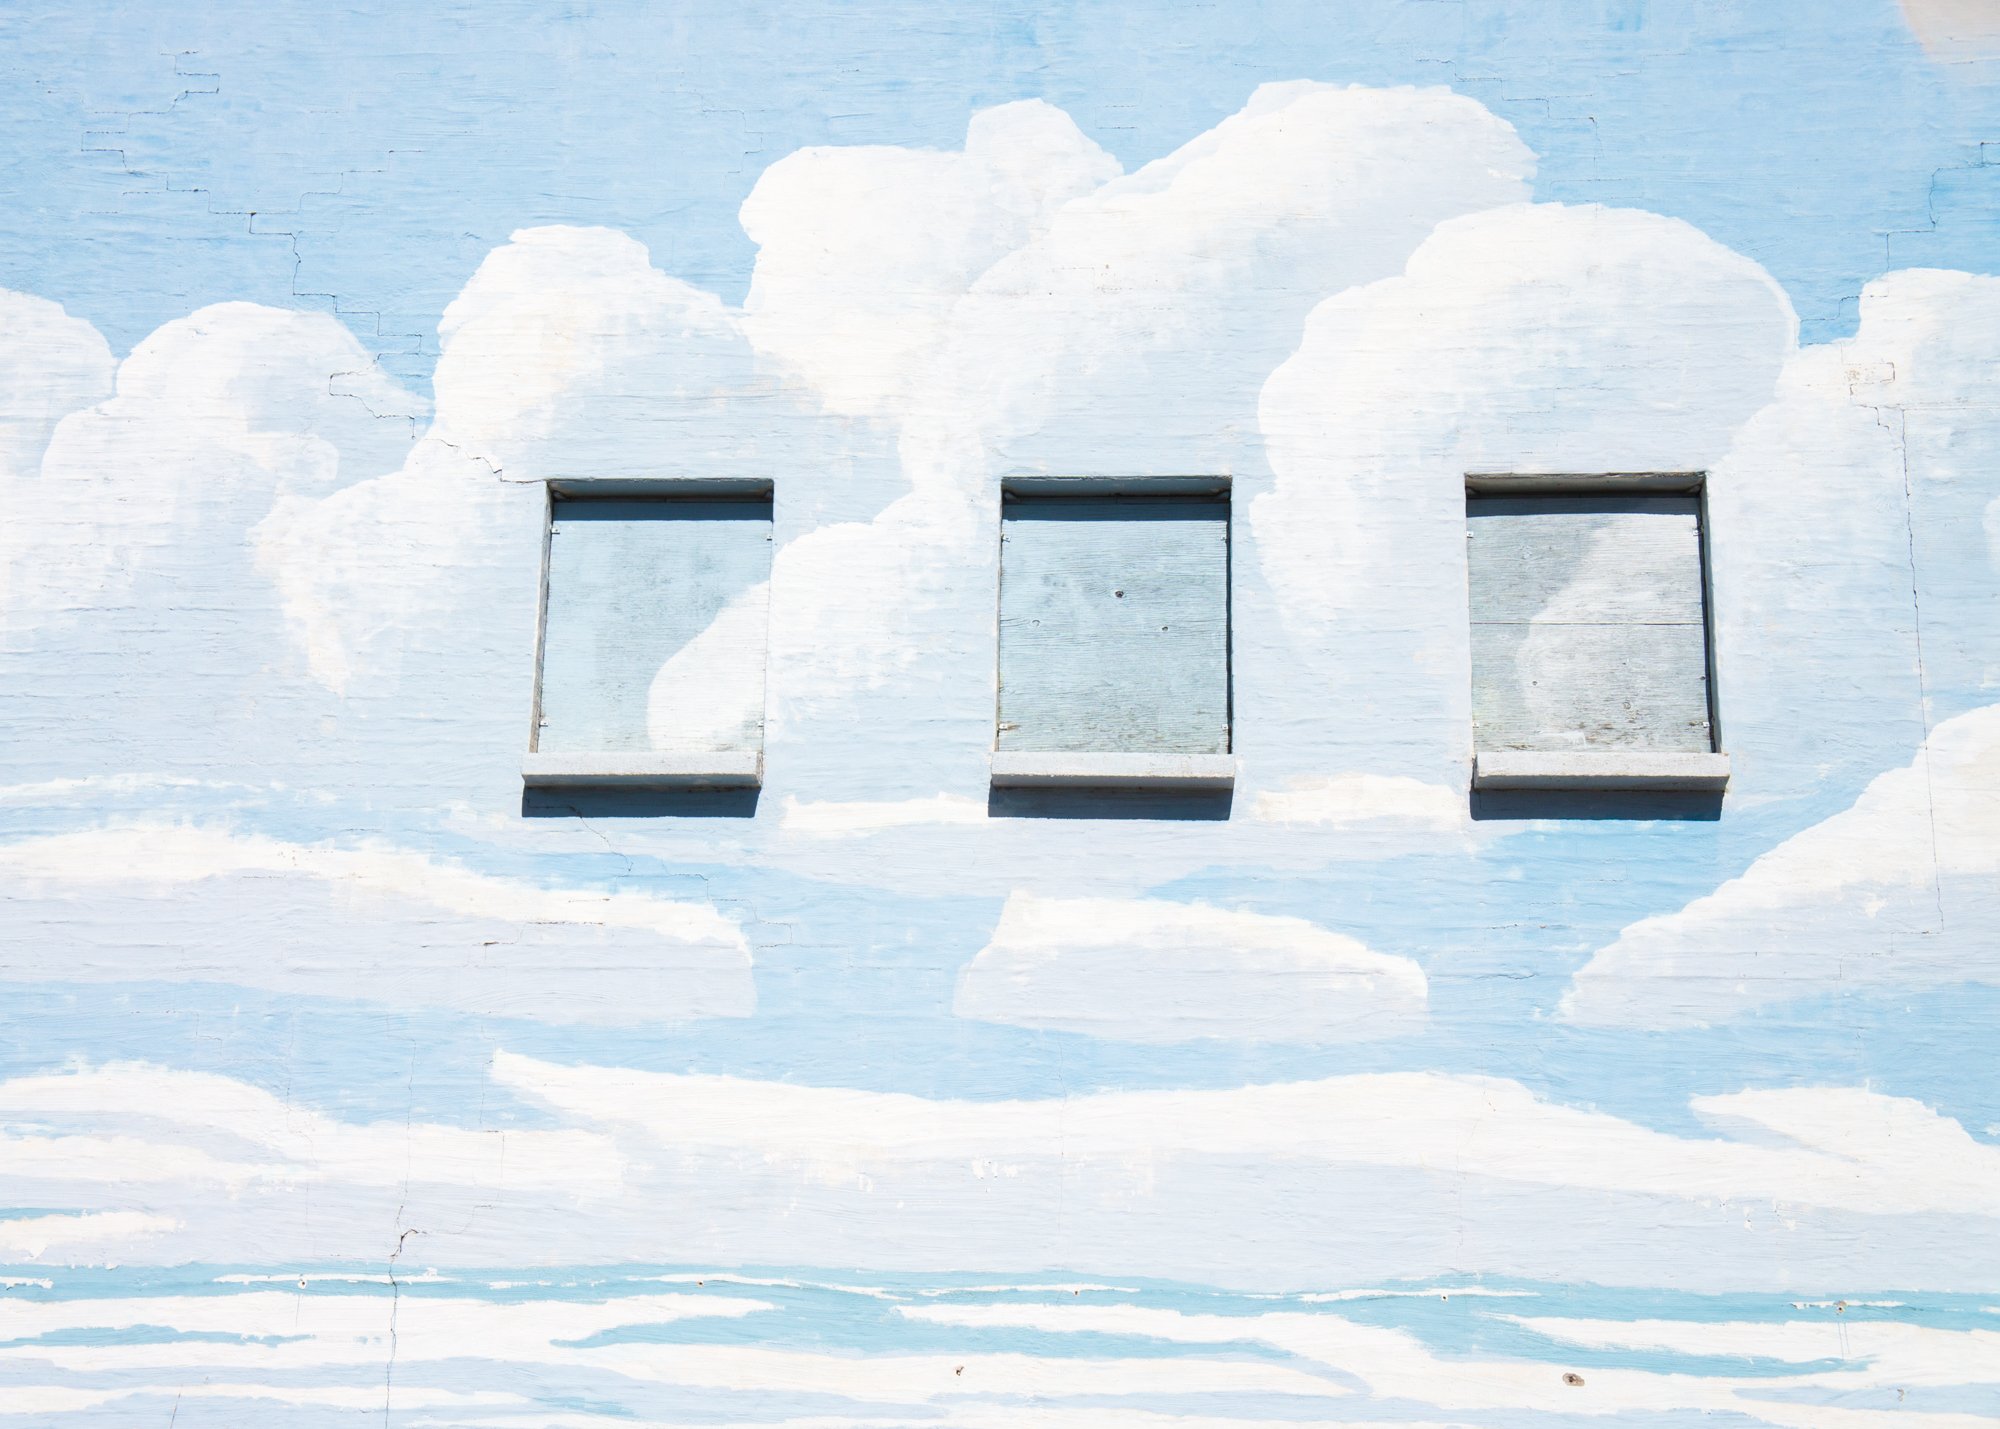 A brick wall painted like a blue sky with large white clouds. The wall has three windows boarded up with plywood that have also been painted over.